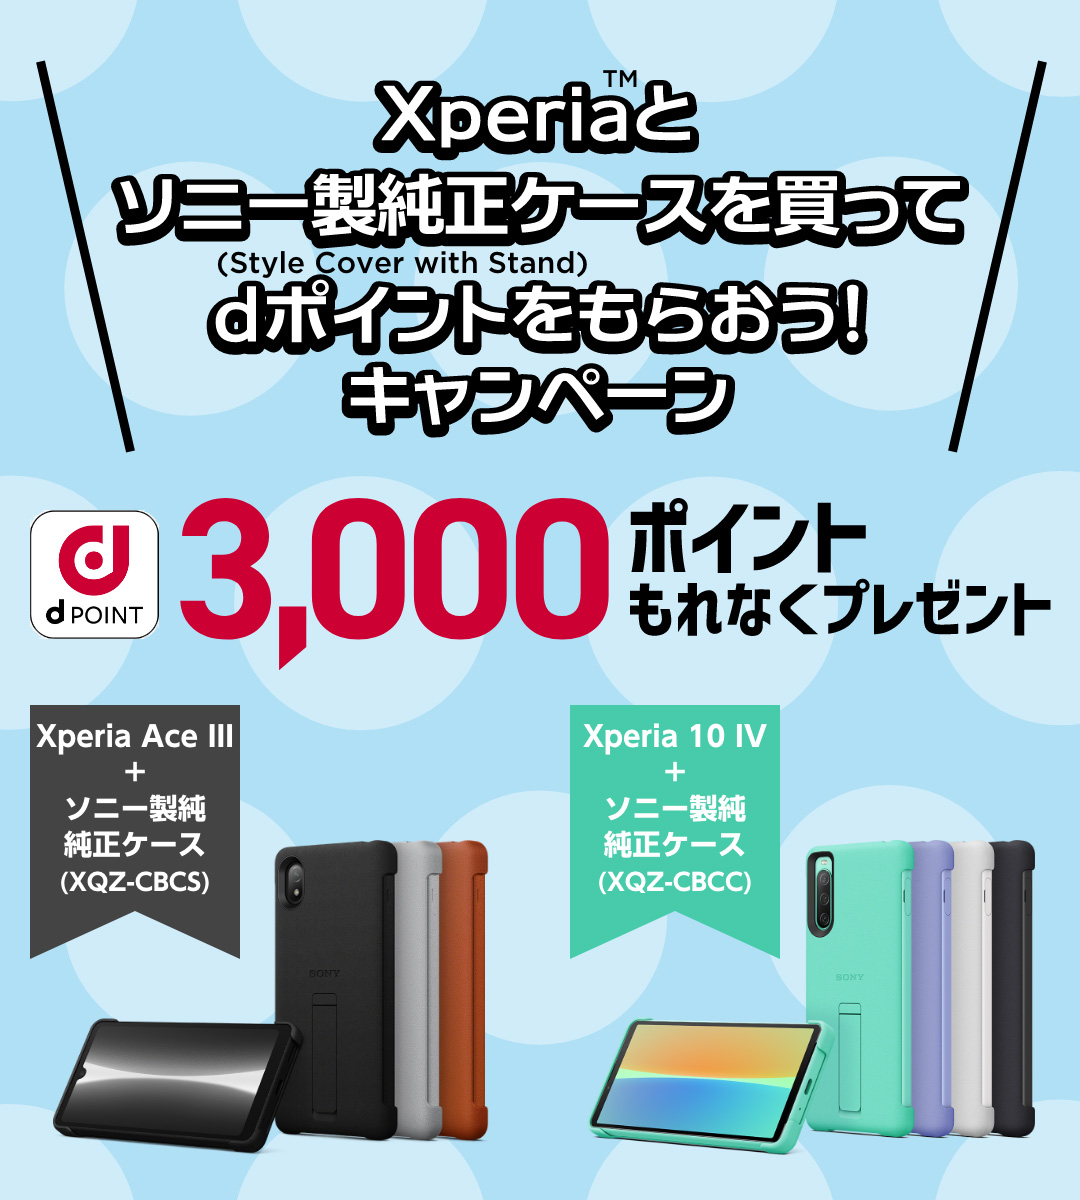 Xperia™とソニー製純正ケース（Style Cover with Stand）を買ってdポイントをもらおう！キャンペーン d POINT 3,000ポイントもれなくプレゼント Xperia Ace III + ソニー製純正ケース（XQZ-CBCS） Xperia 10 IV ＋ソニー製純正ケース（XQZ-CBCC